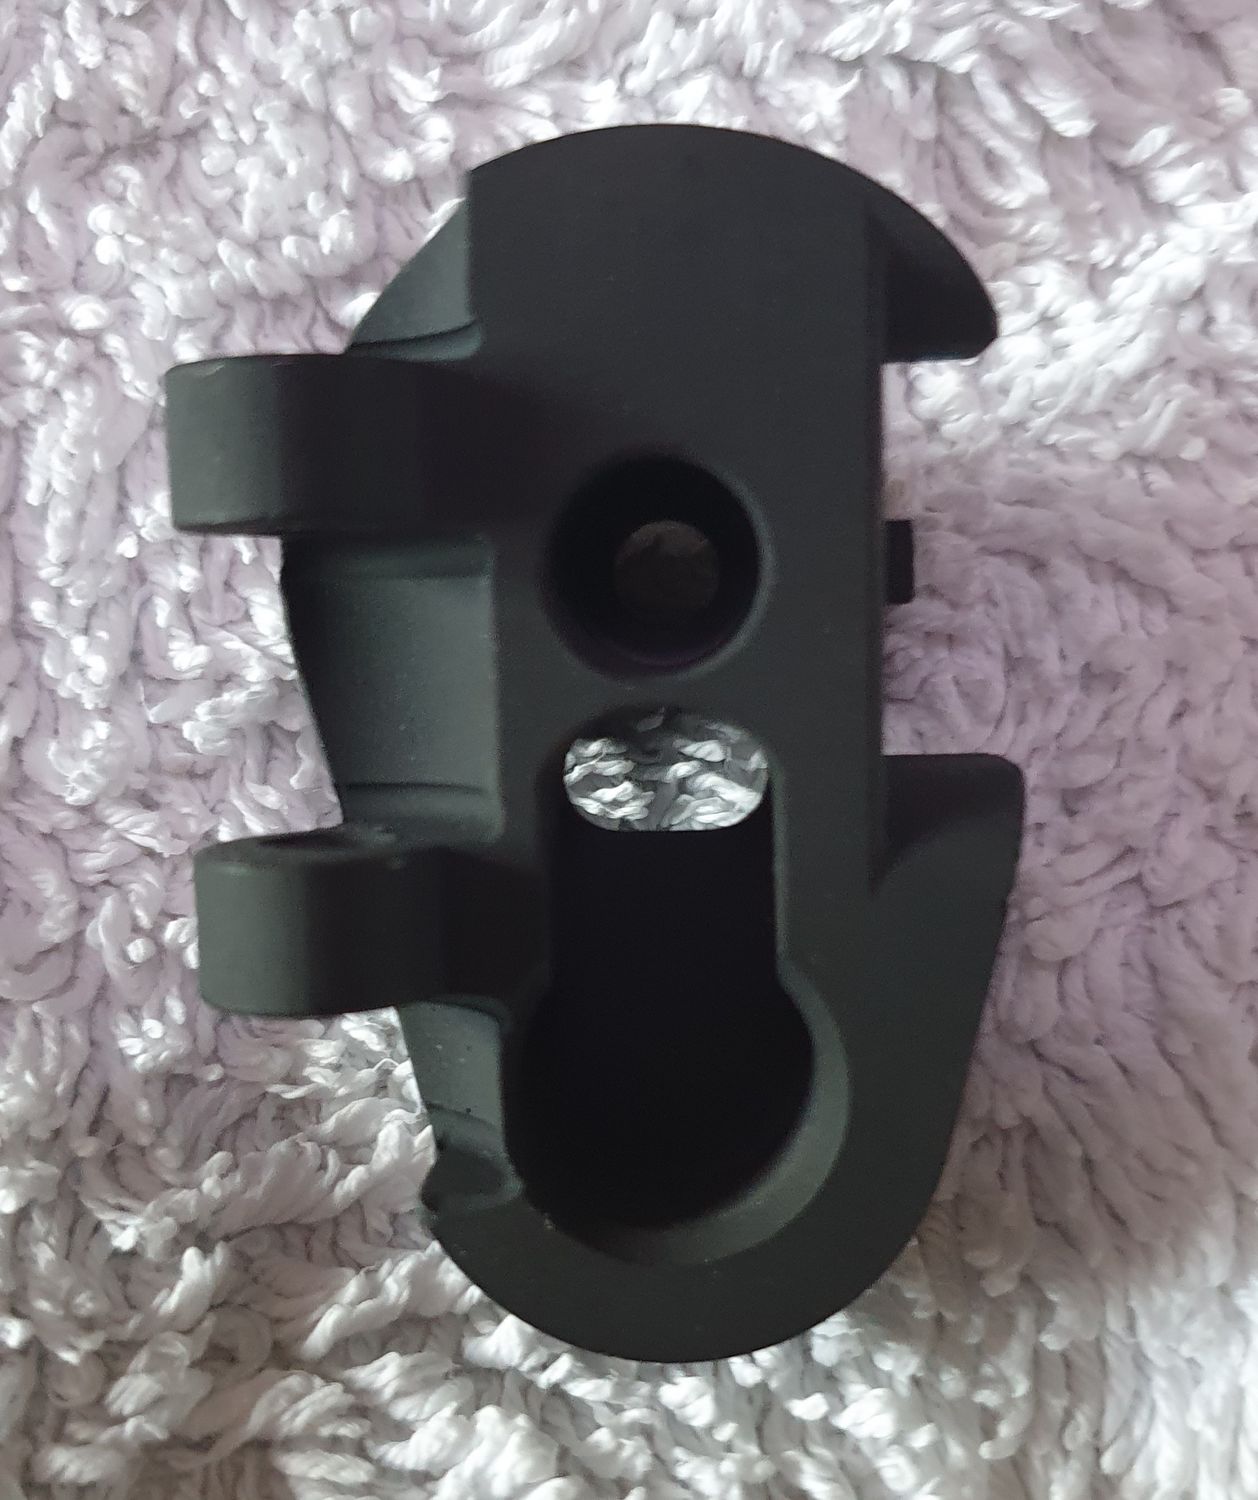 Bullgear CNC stock adapter for KAC PDW - Parts - Airsoft Forums UK